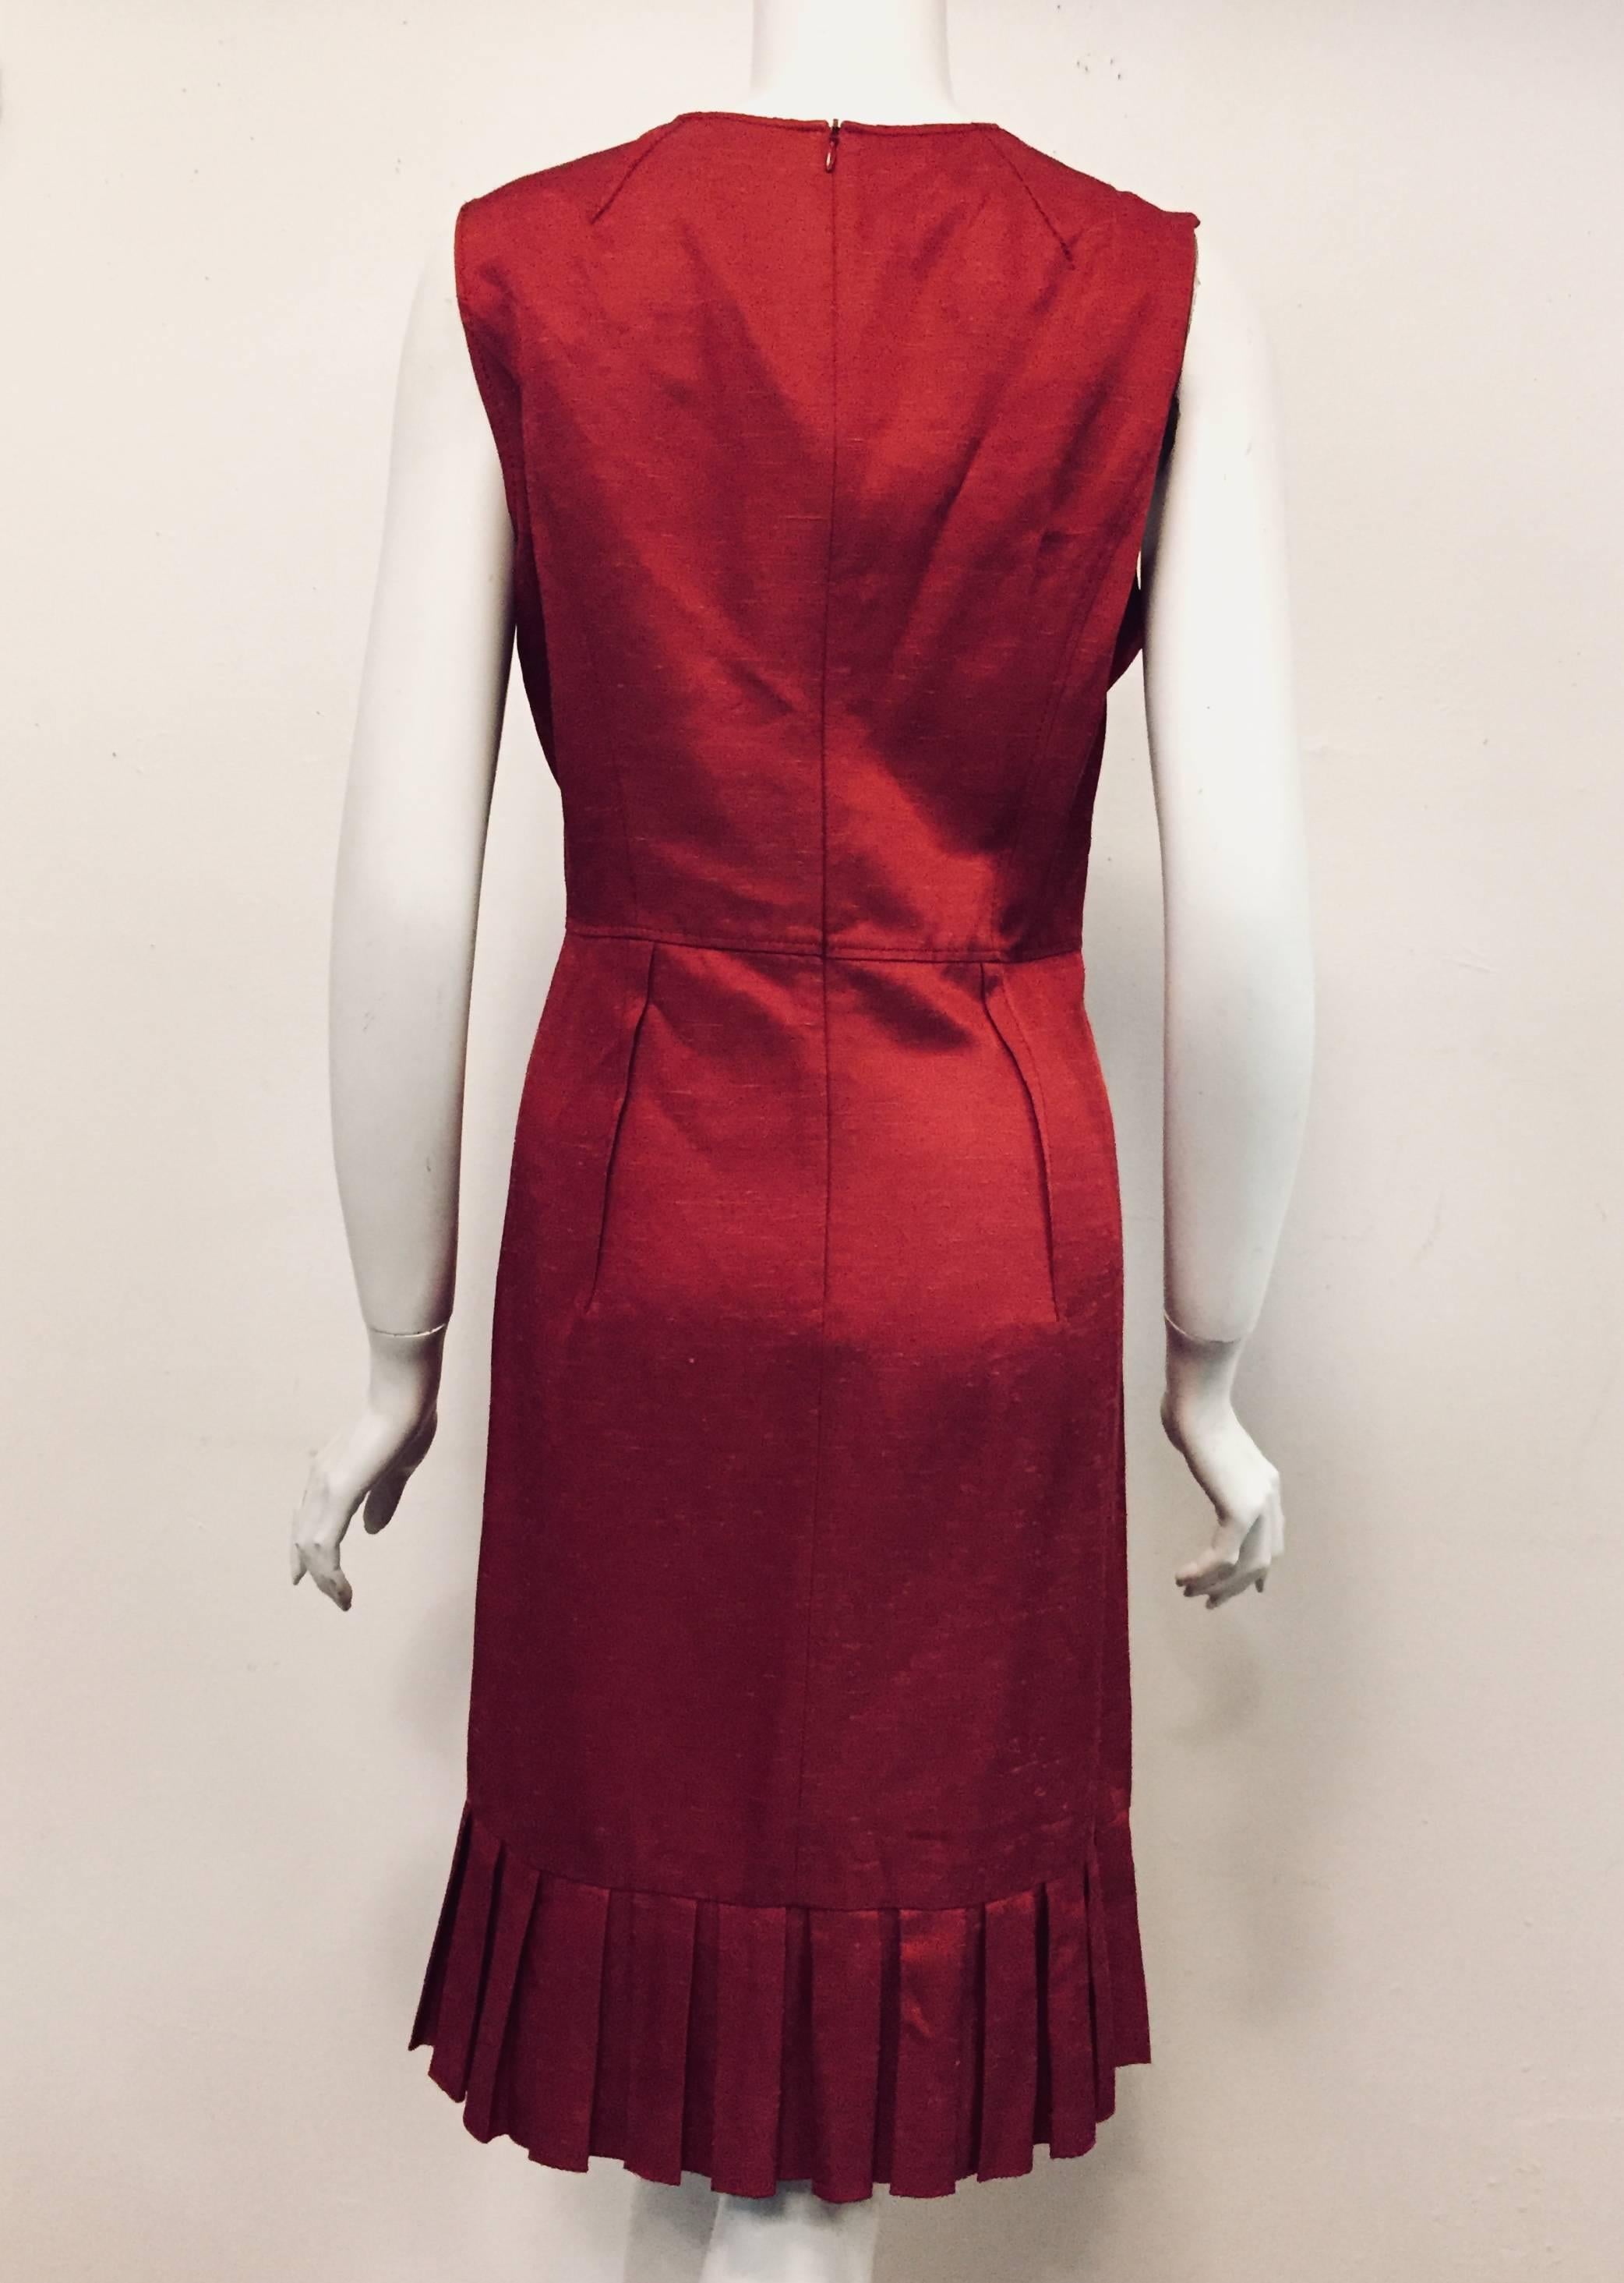 This Valentino very red wool blend dress is not lined, but for texture the dress has a great amount of top stitching around shoulders, waistline and darts at bust.  The hem of this dress is pleated all around adding to the Valentino look.  This